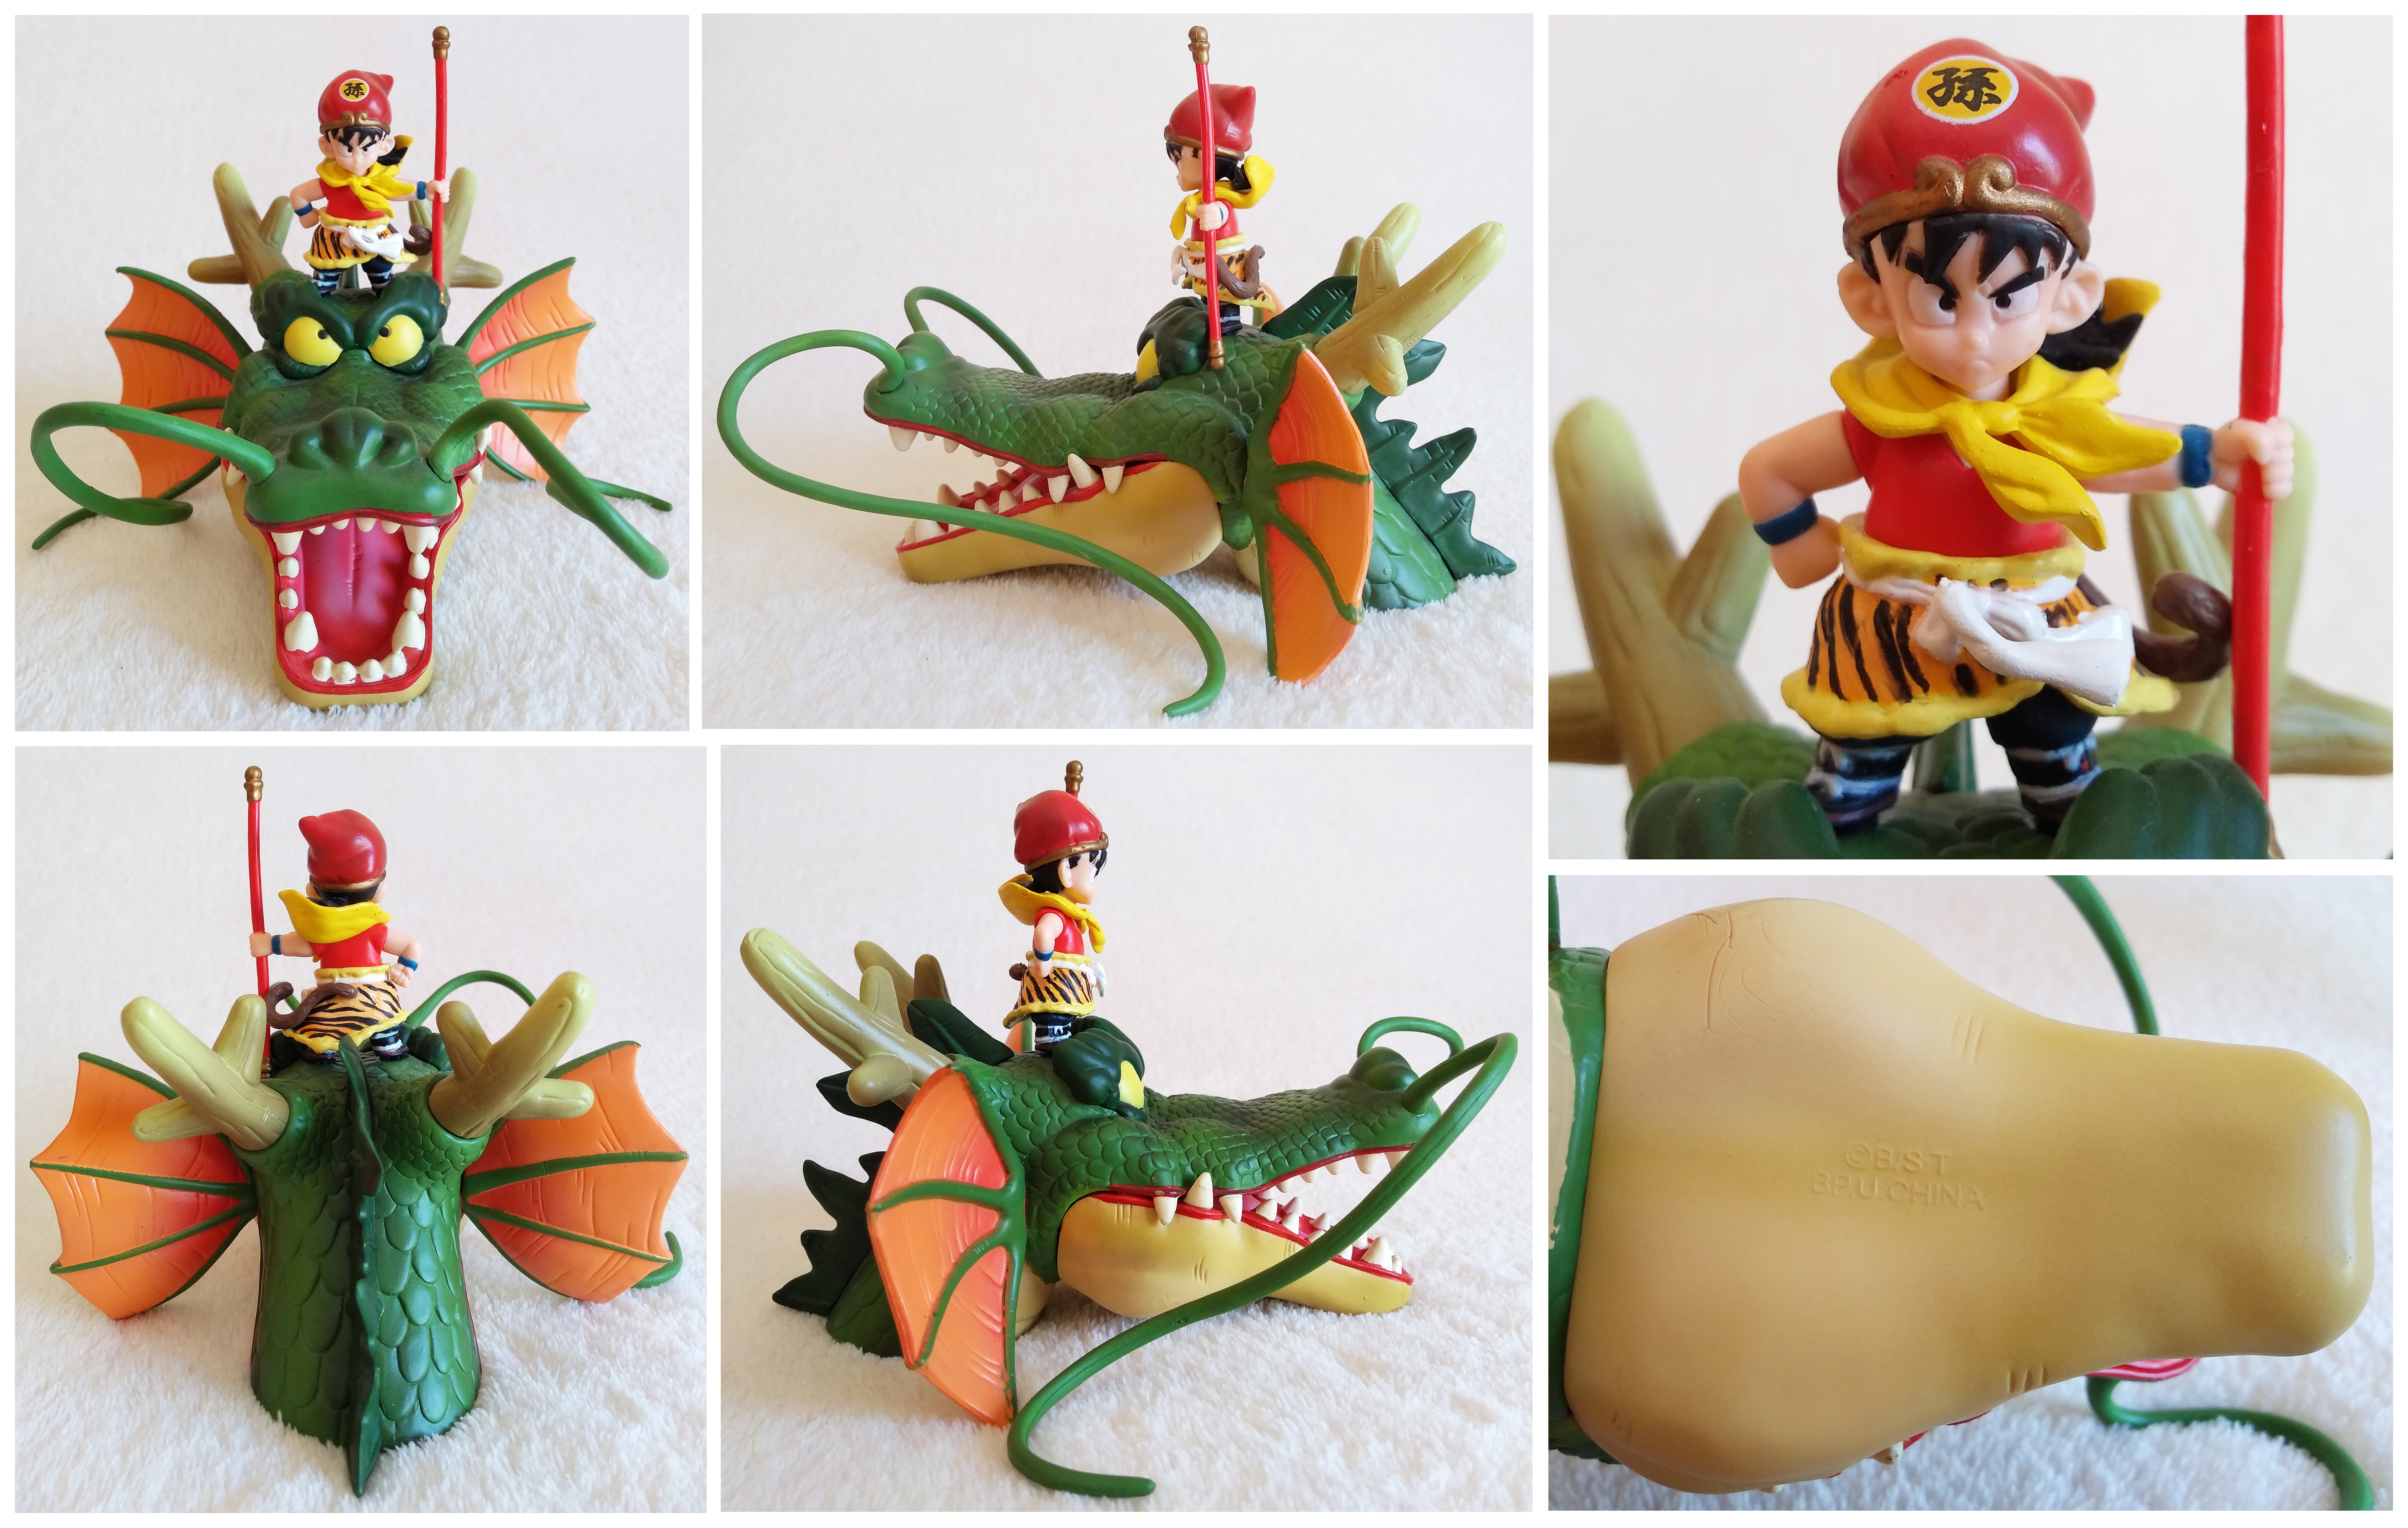 Dragonball Museum Collection by Unifive Son Gohan as Monkey King / Journey to the West